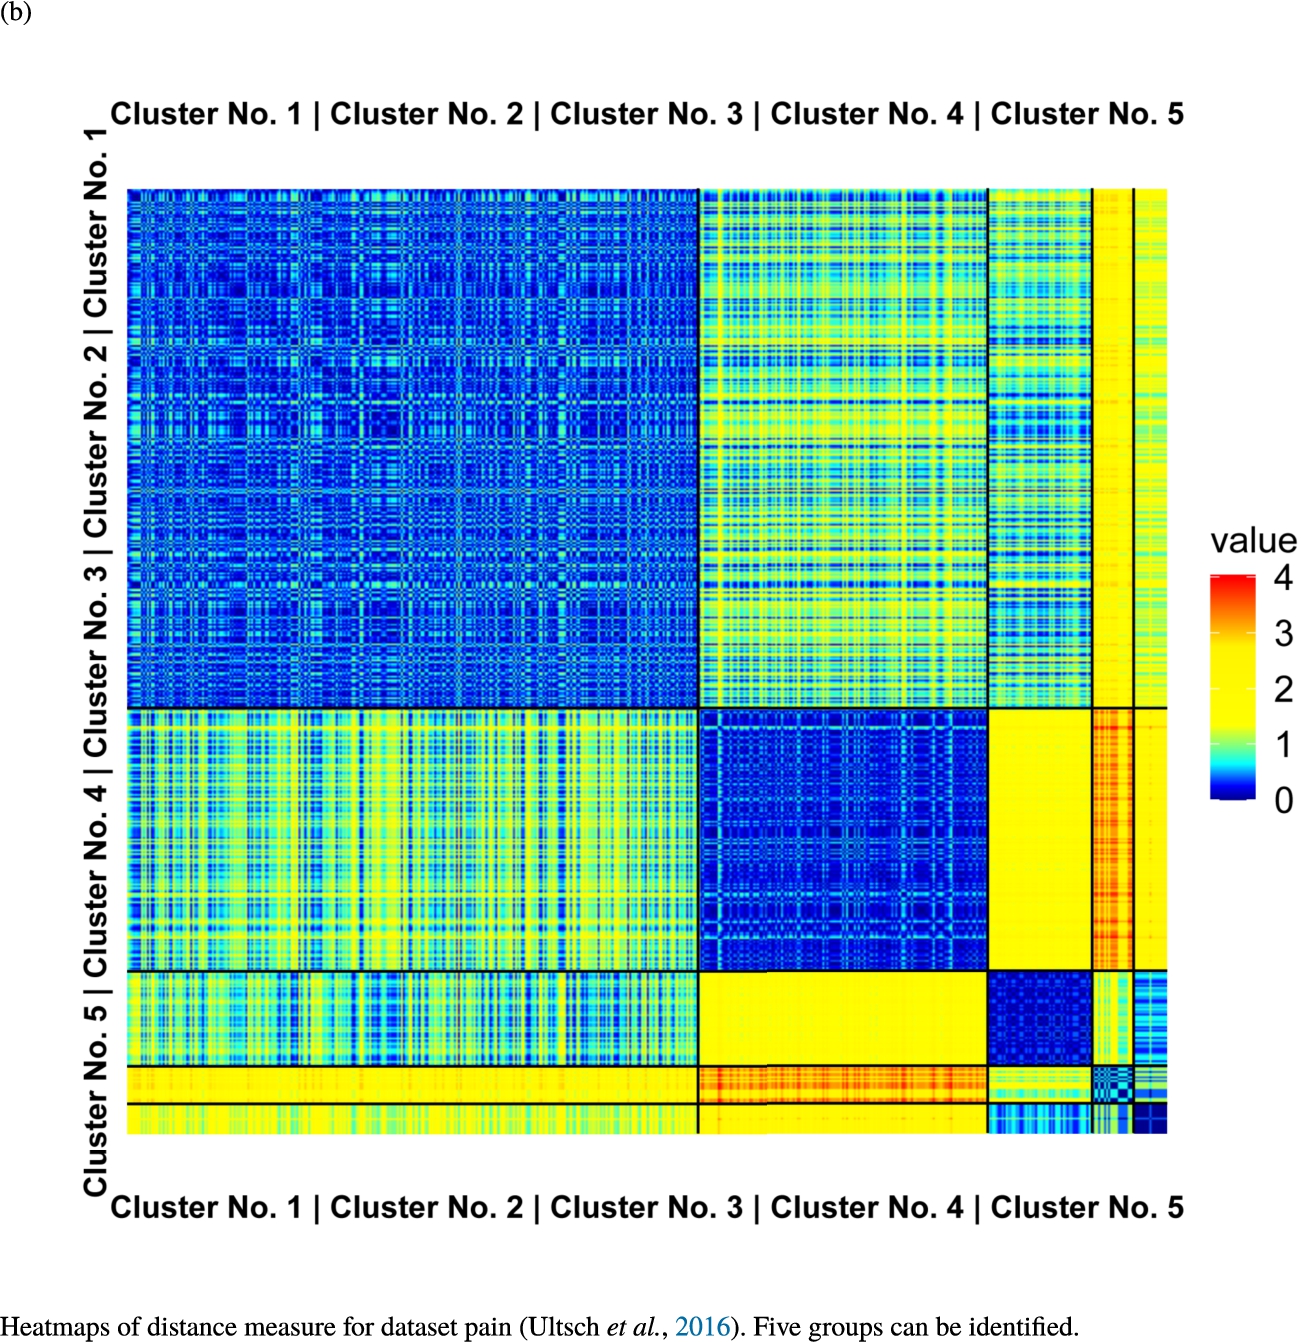 Knowledge-based structures of associated gene sets indicate homogeneous groups verified by heatmaps. The heatmaps show the value of the proposed distance measure.